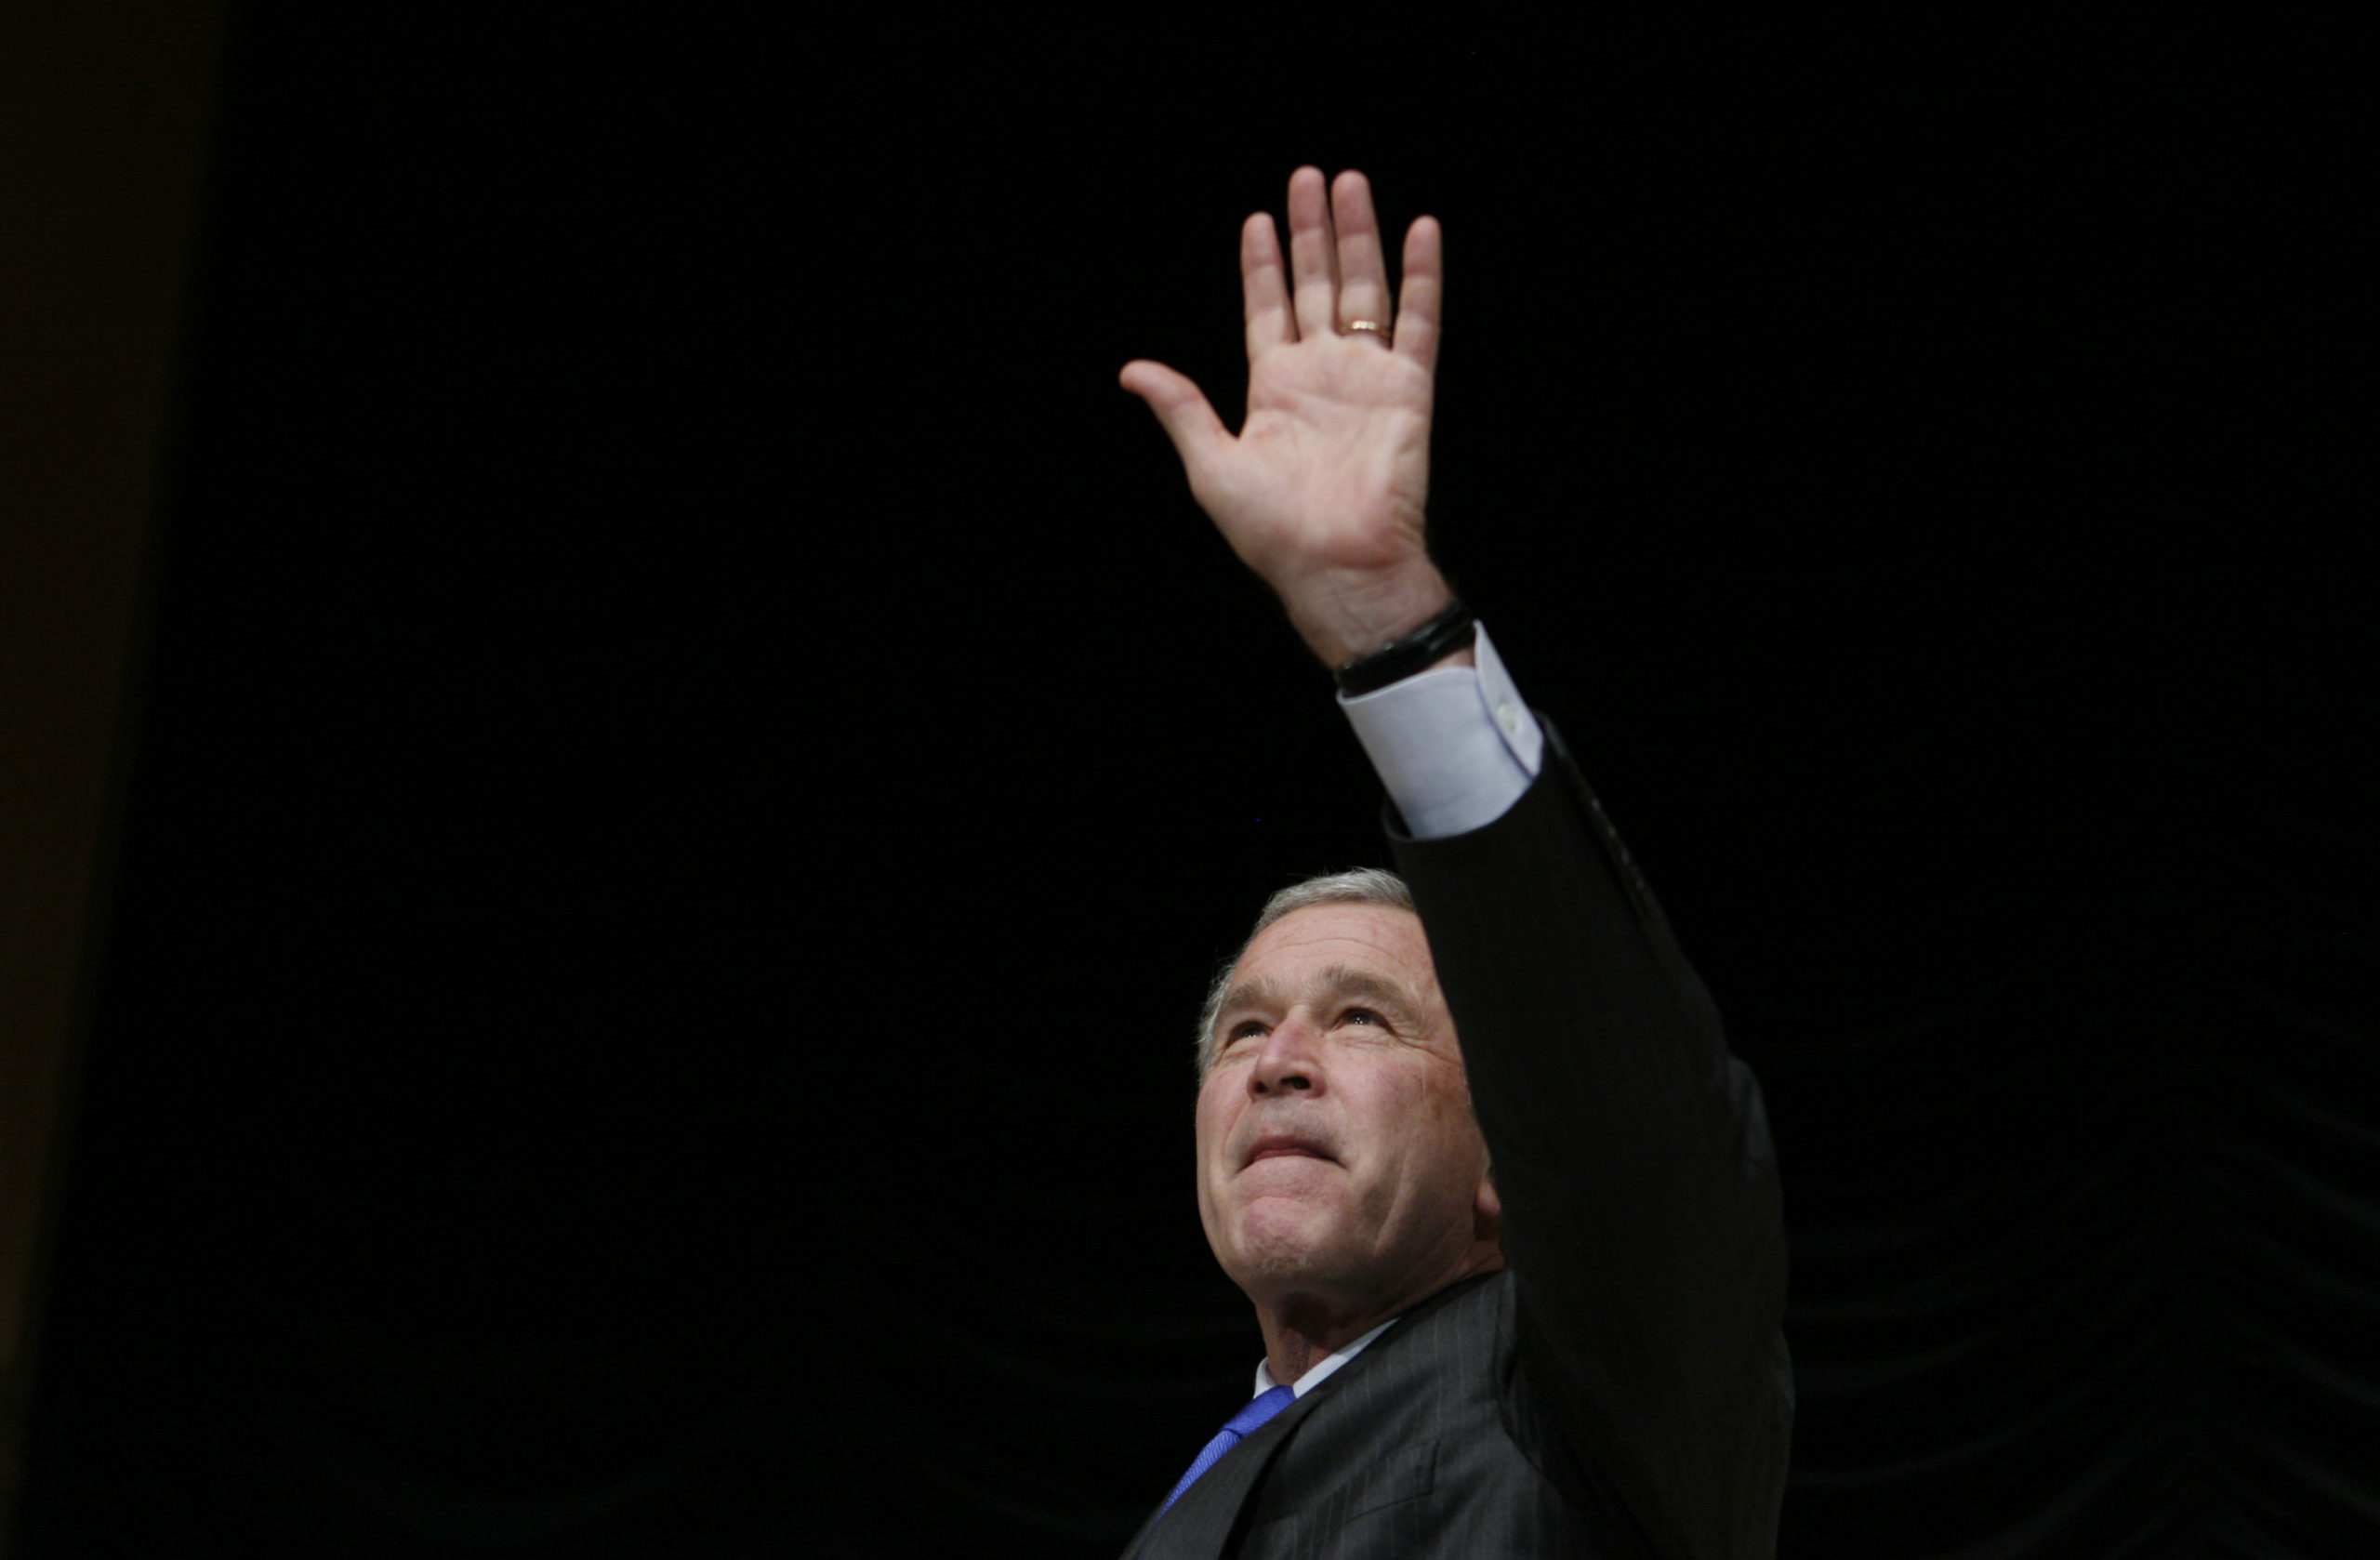 U.S. President George W. Bush waves after delivering remarks on the Western Hemisphere Policy in Washington March 5, 2007. REUTERS/Jim Young (UNITED STATES)